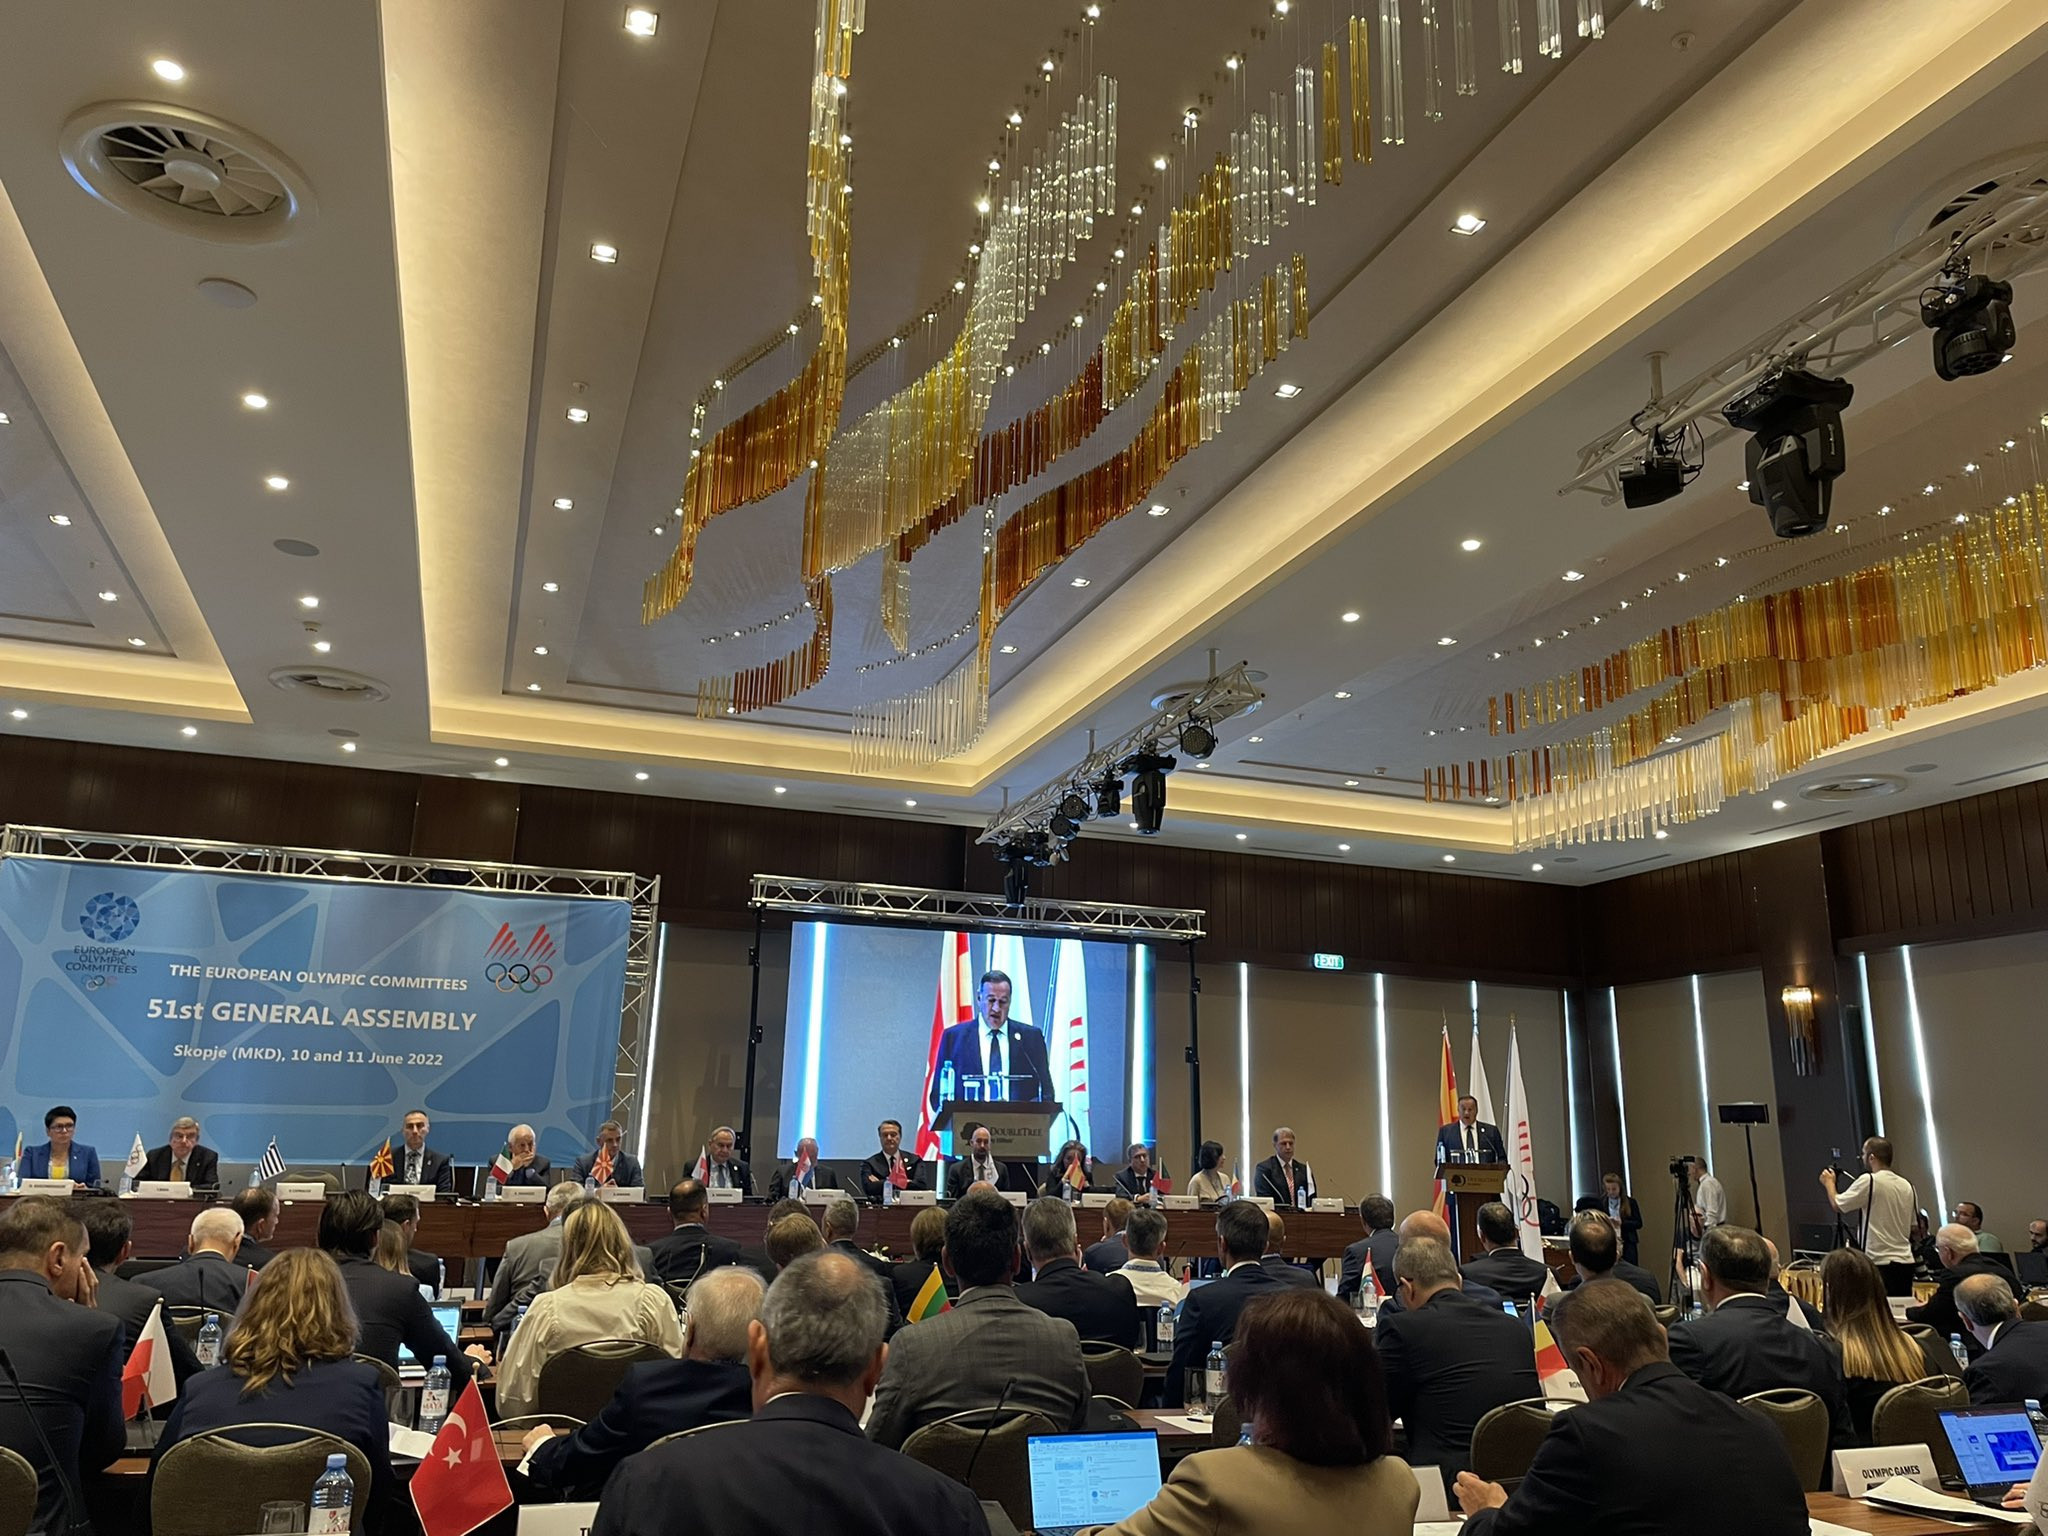 EOC President Spyros Capralos confirmed that Russia and Belarus would not be present at the General Assembly in Skopje ©EOC